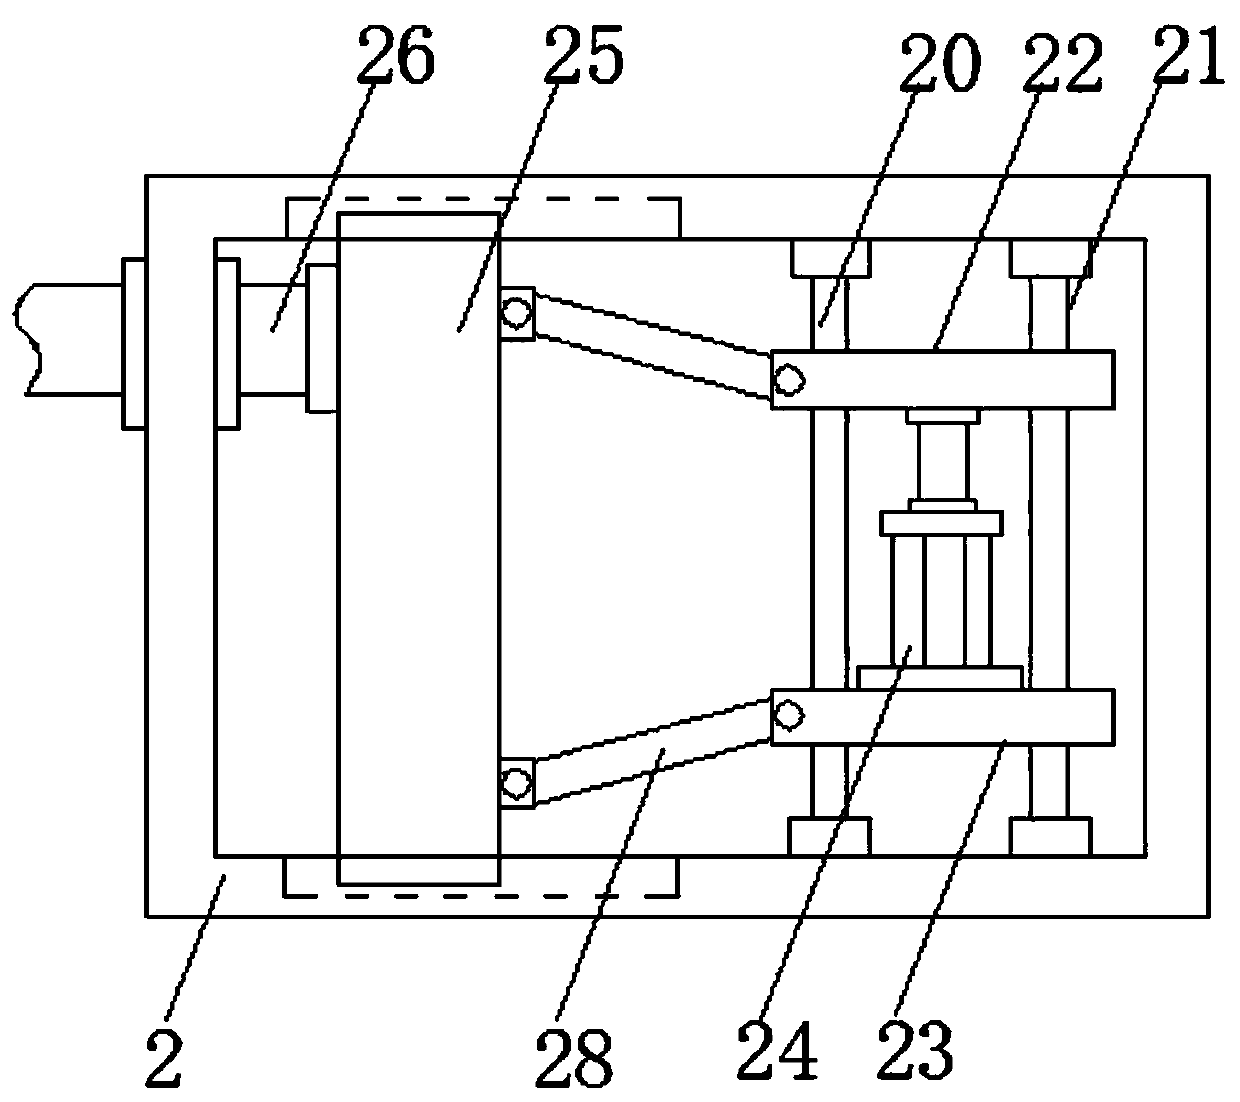 A connecting and fixing device for large-scale processing equipment for furniture production